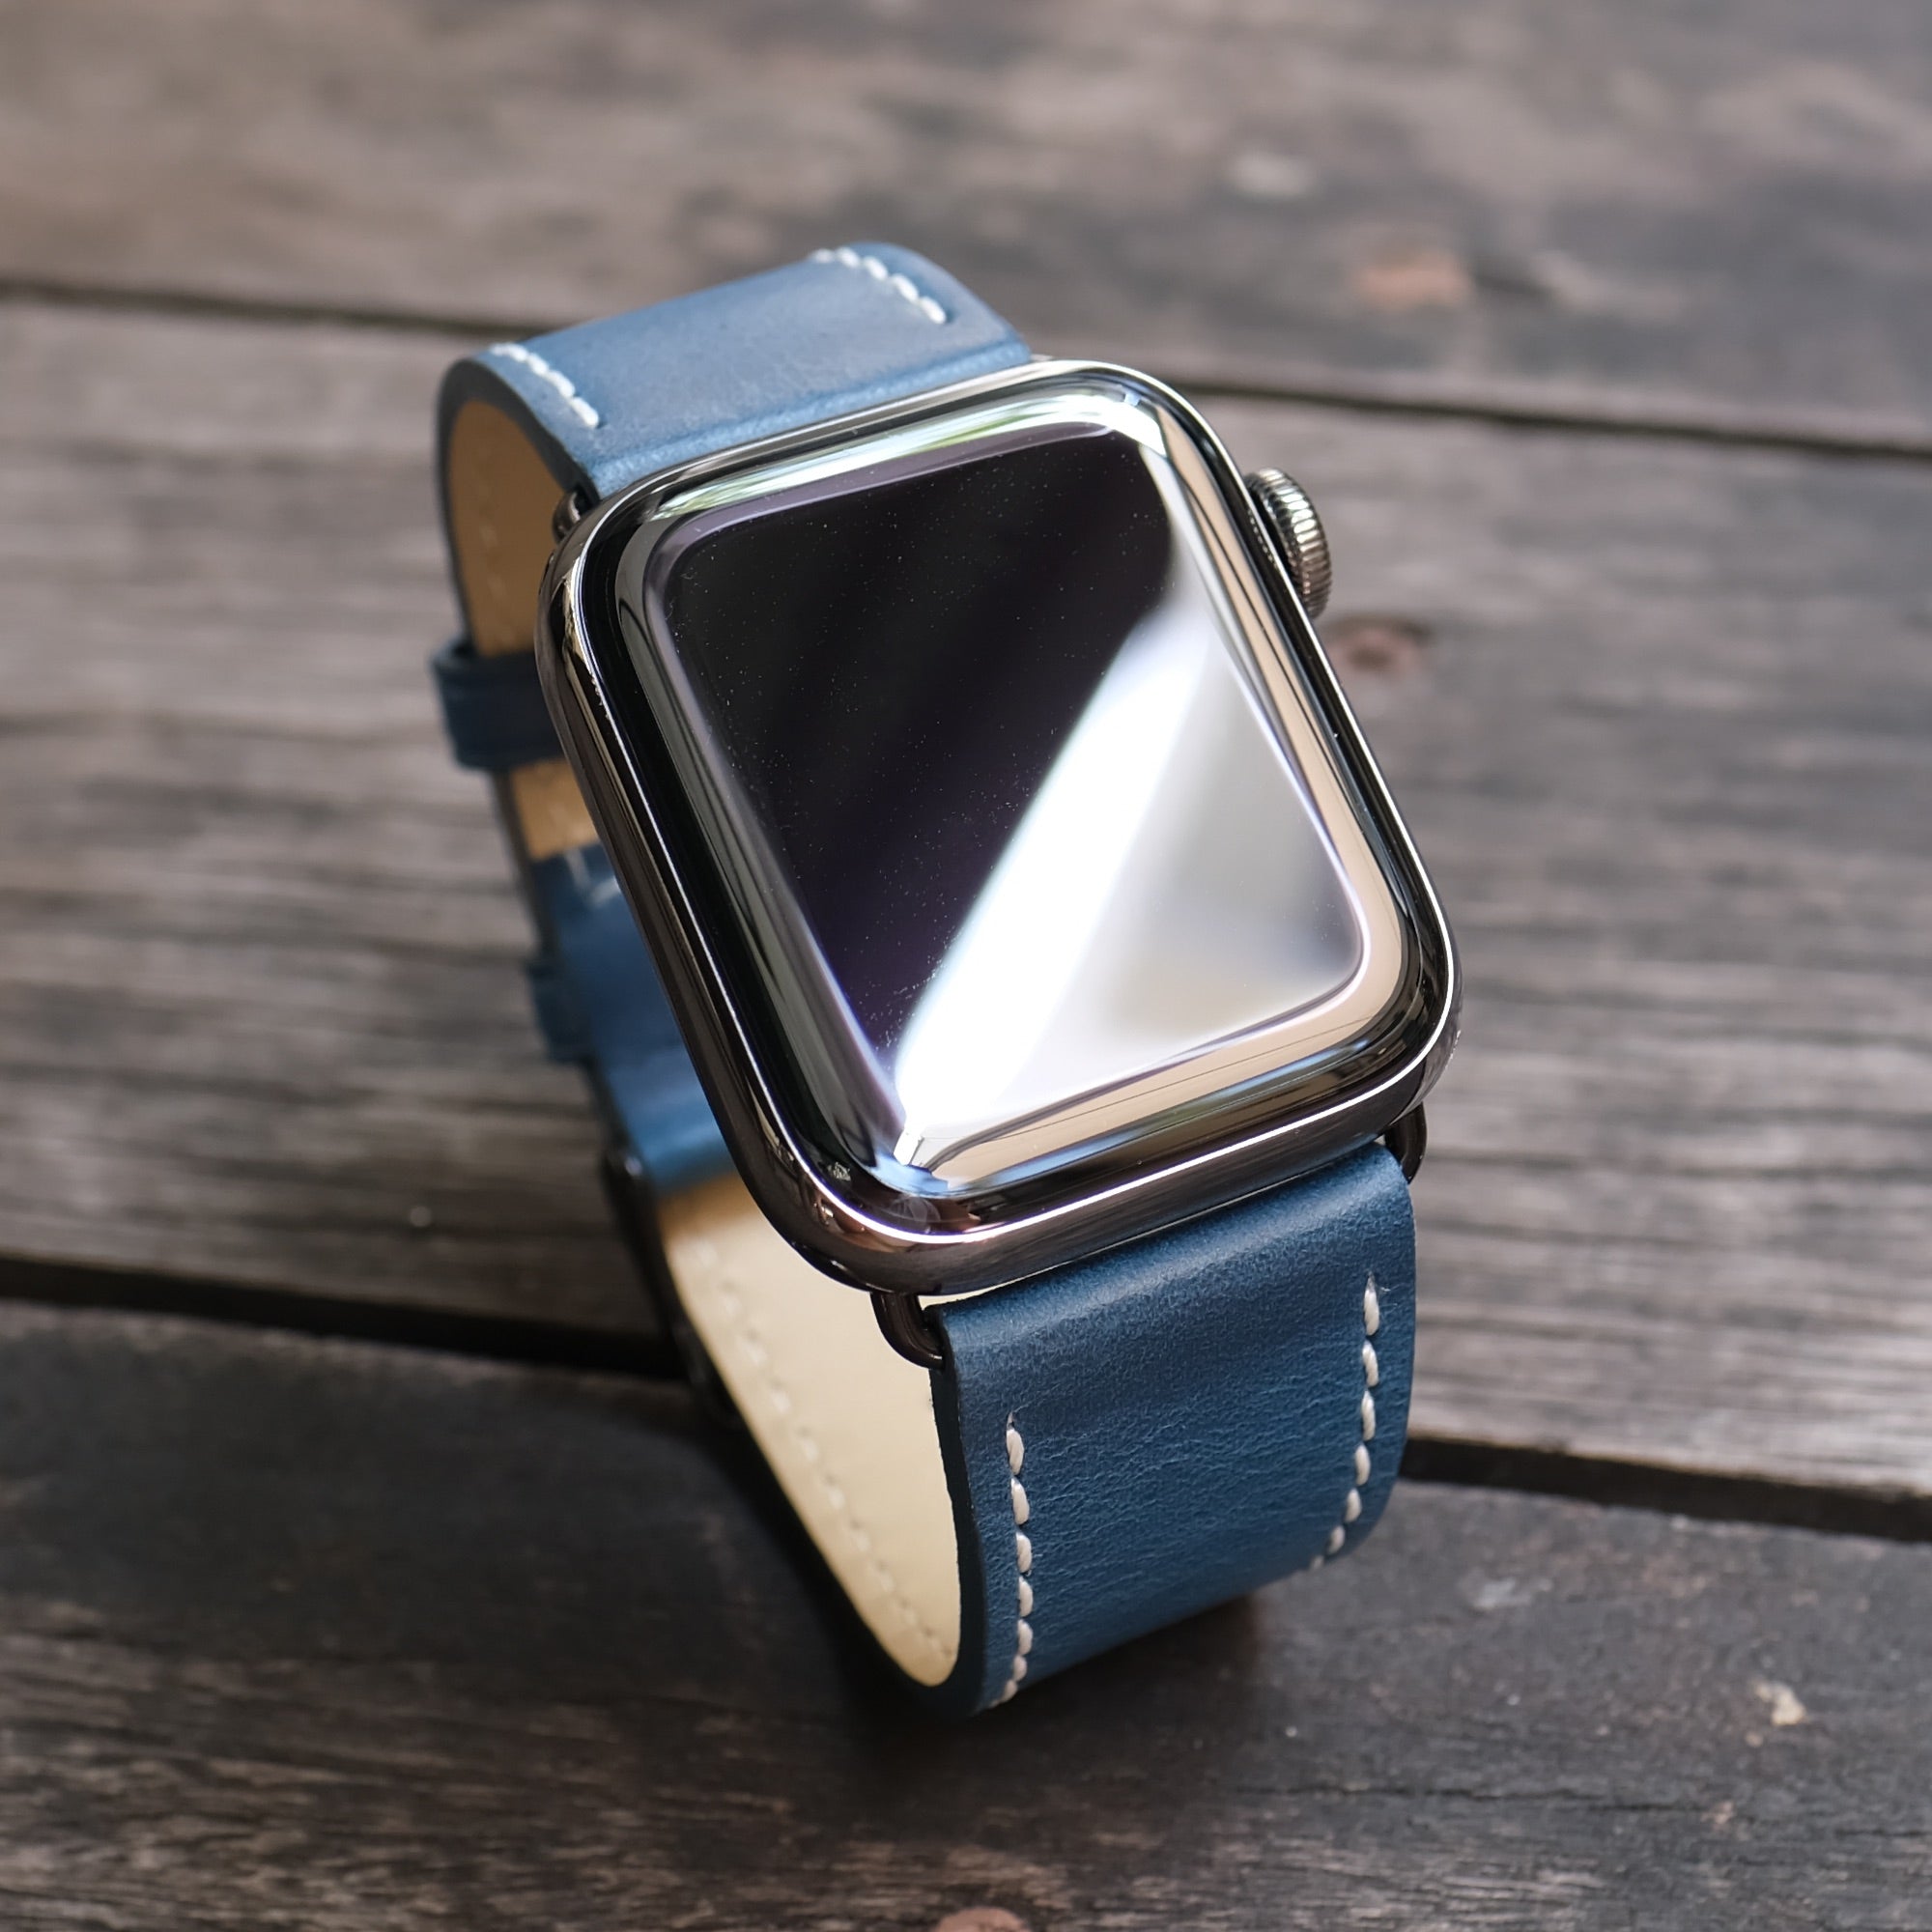 Pin and Buckle Apple Watch Bands - Full Grain Vegetable Tanned Leather - Luxe - Ocean Blue - Black